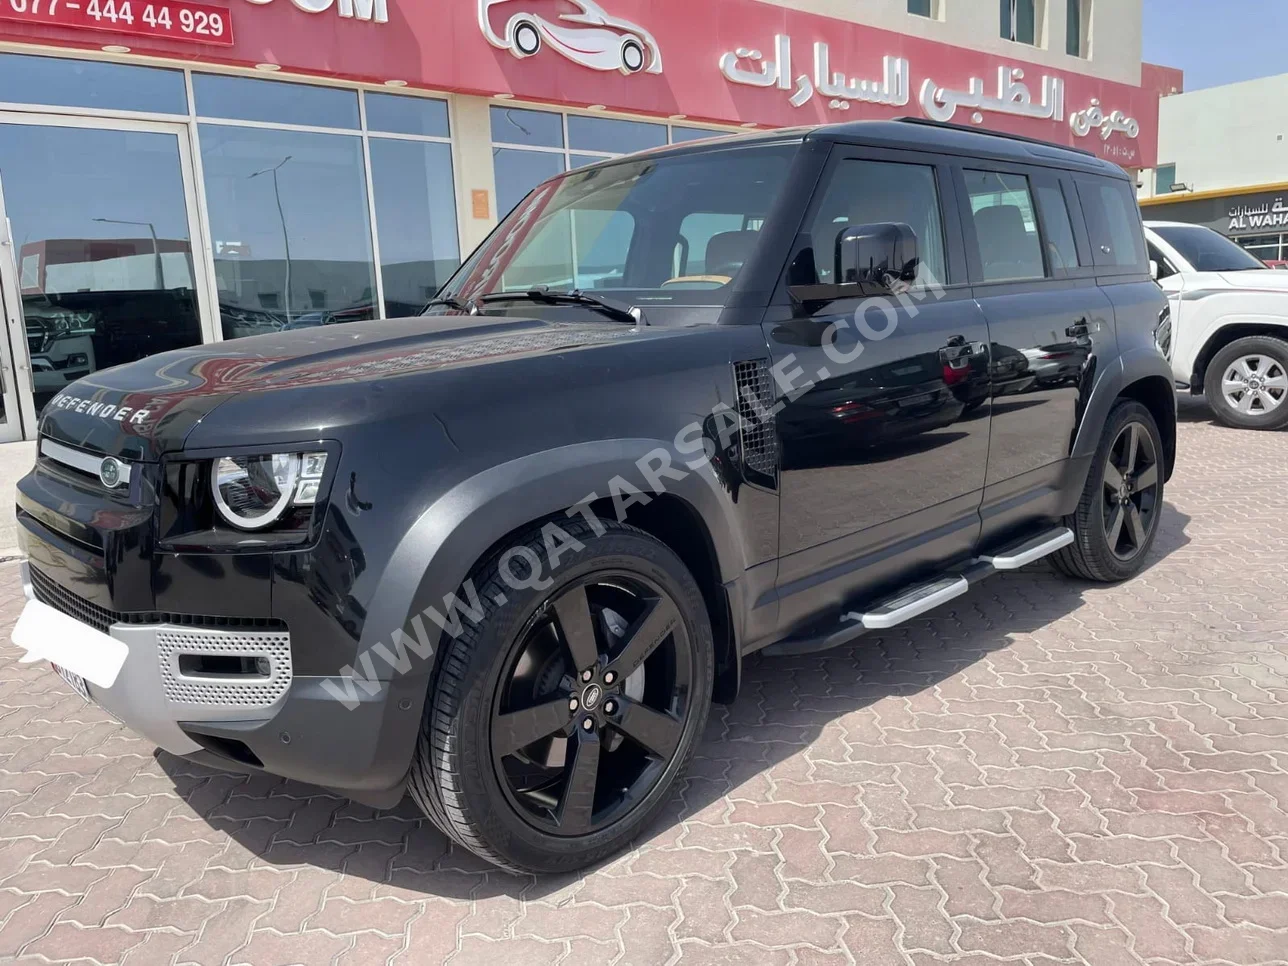 Land Rover  Defender  110  2023  Automatic  34,000 Km  6 Cylinder  Four Wheel Drive (4WD)  SUV  Black  With Warranty